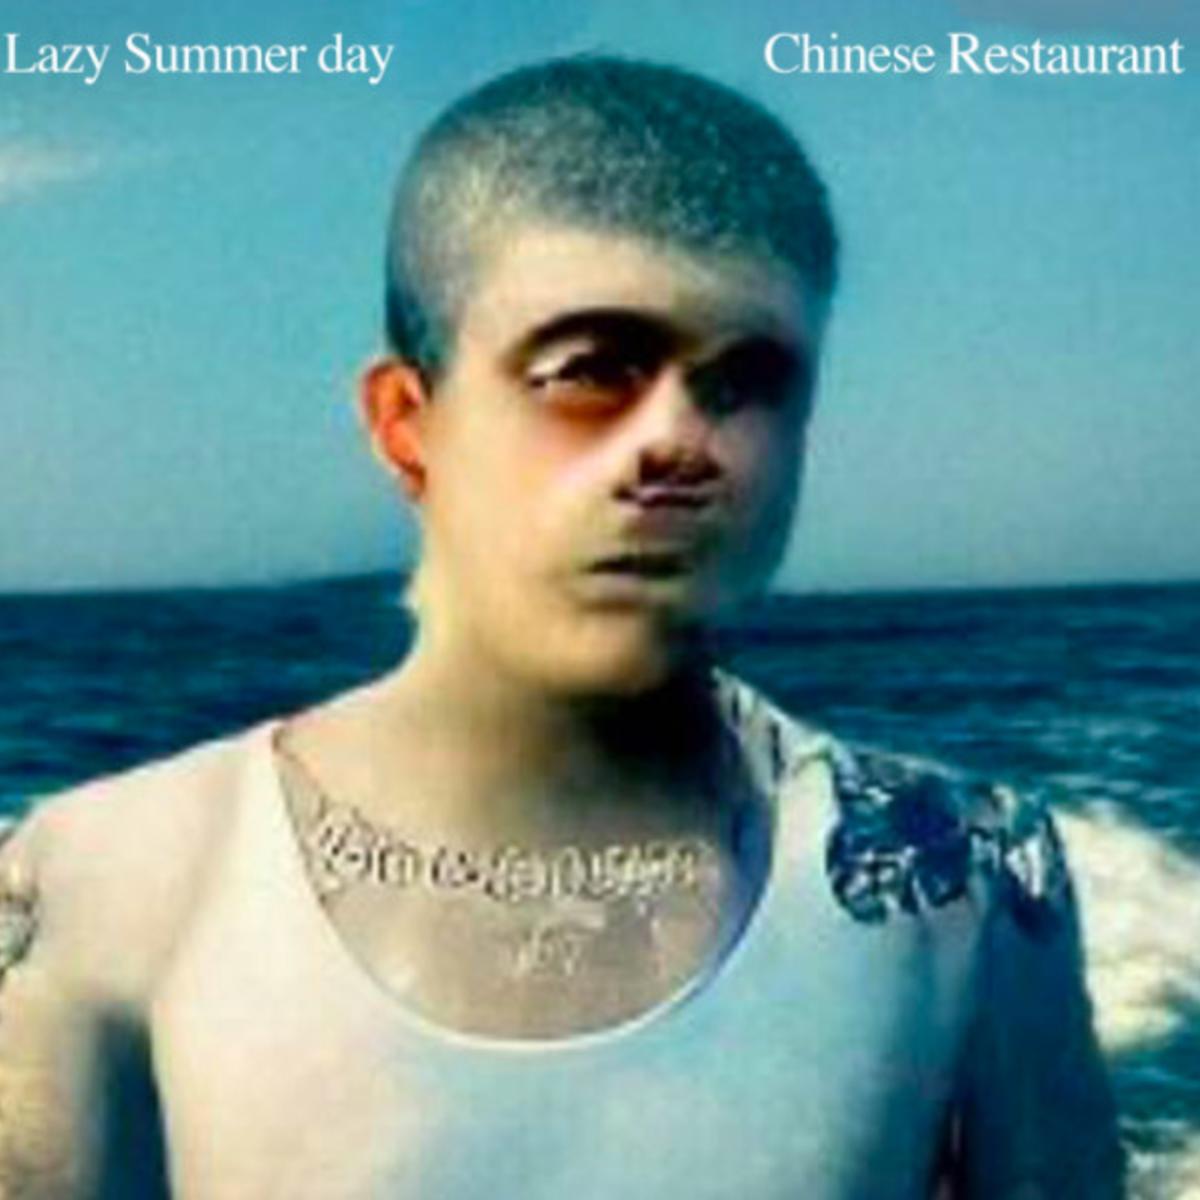 Yung Lean Chinese Restaurant